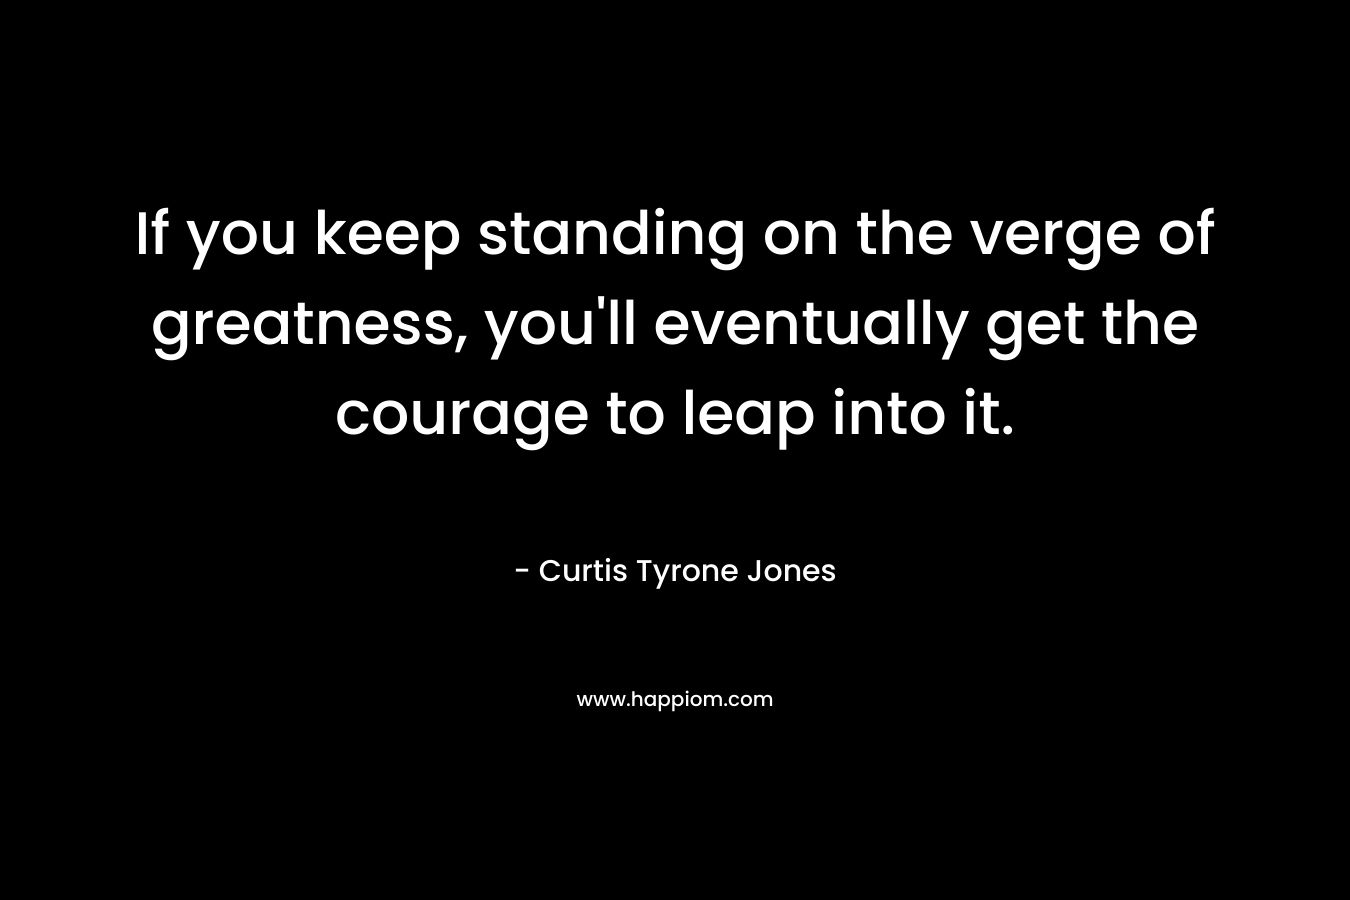 If you keep standing on the verge of greatness, you’ll eventually get the courage to leap into it. – Curtis Tyrone Jones